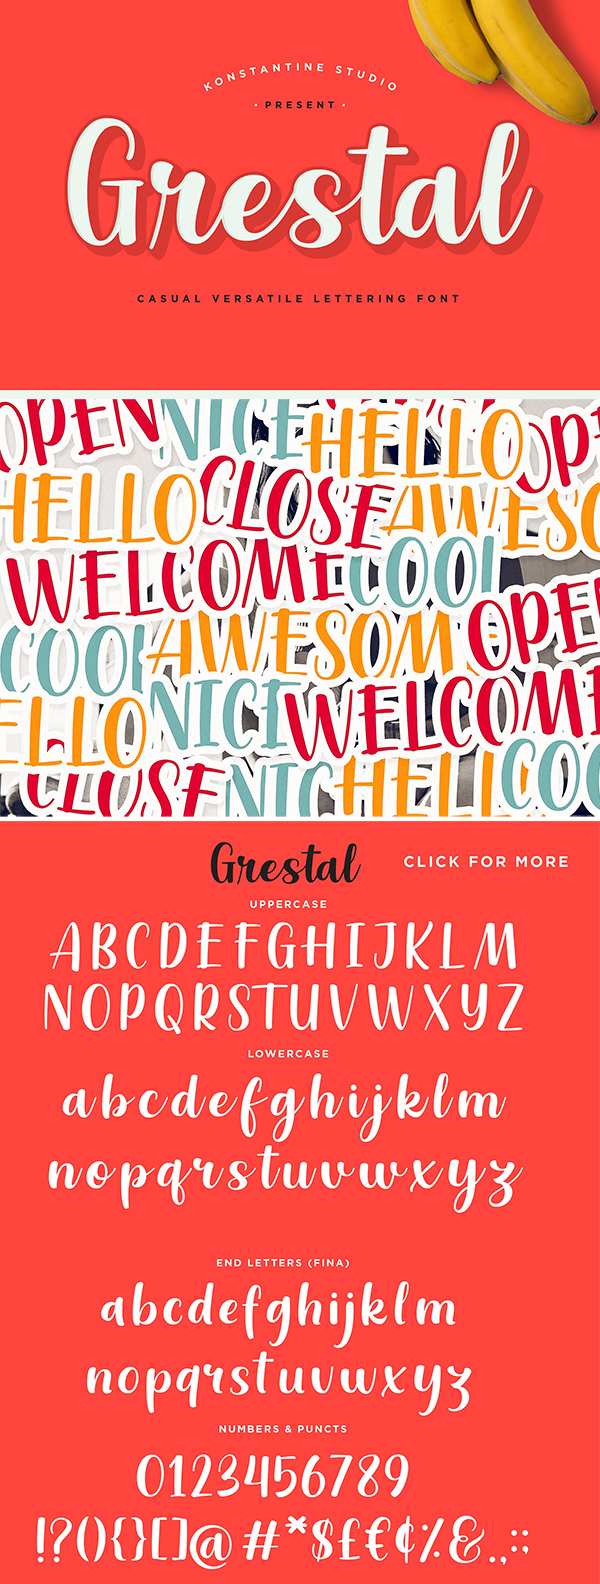 60 Best Brush Fonts For Graphic Designers - 34